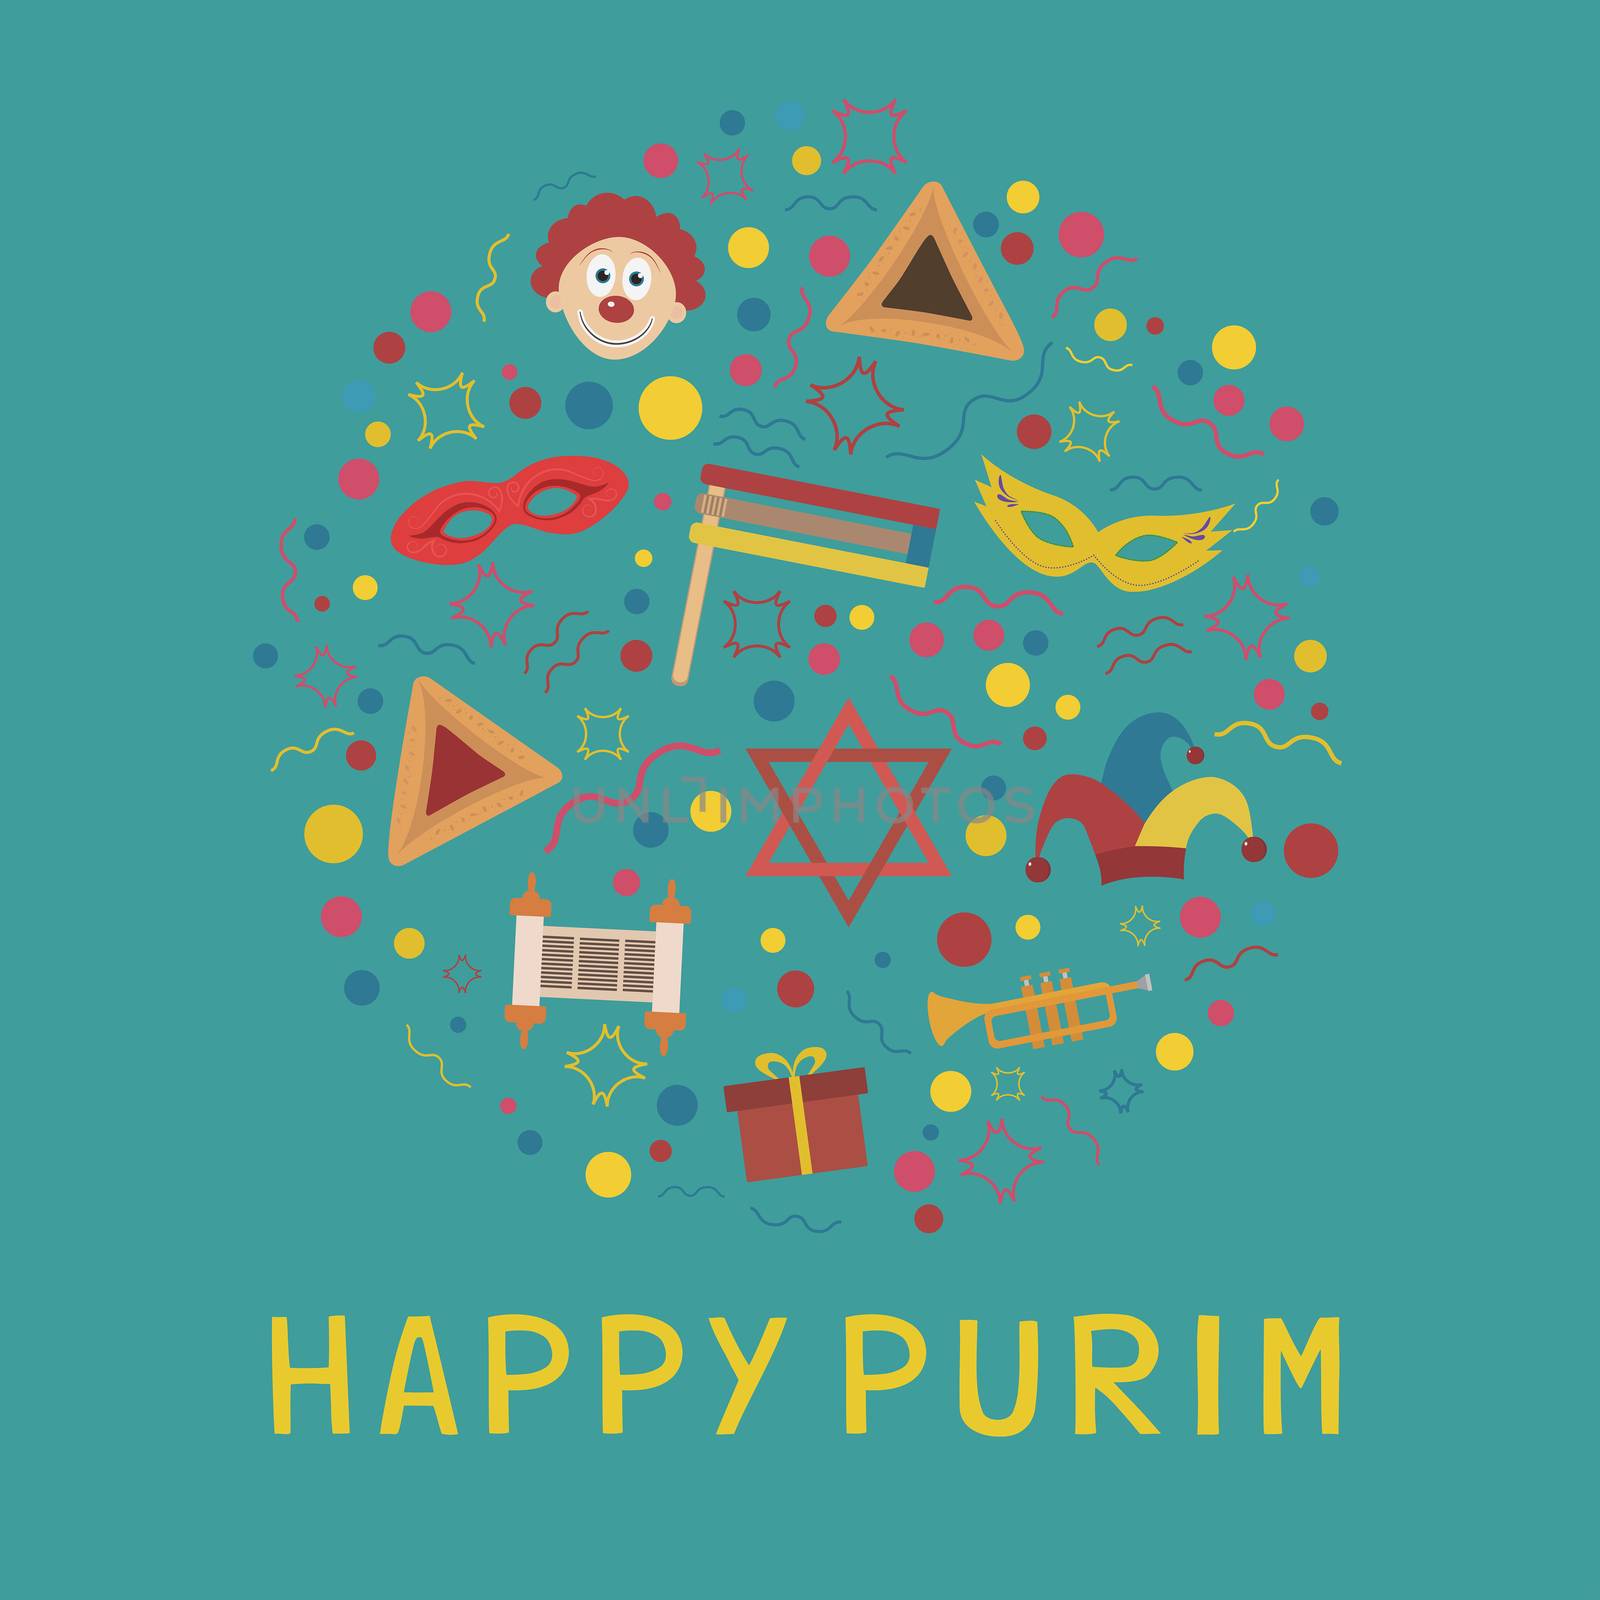 Purim holiday flat design icons set in round shape with text in english "Happy Purim". Vector eps10 illustration.